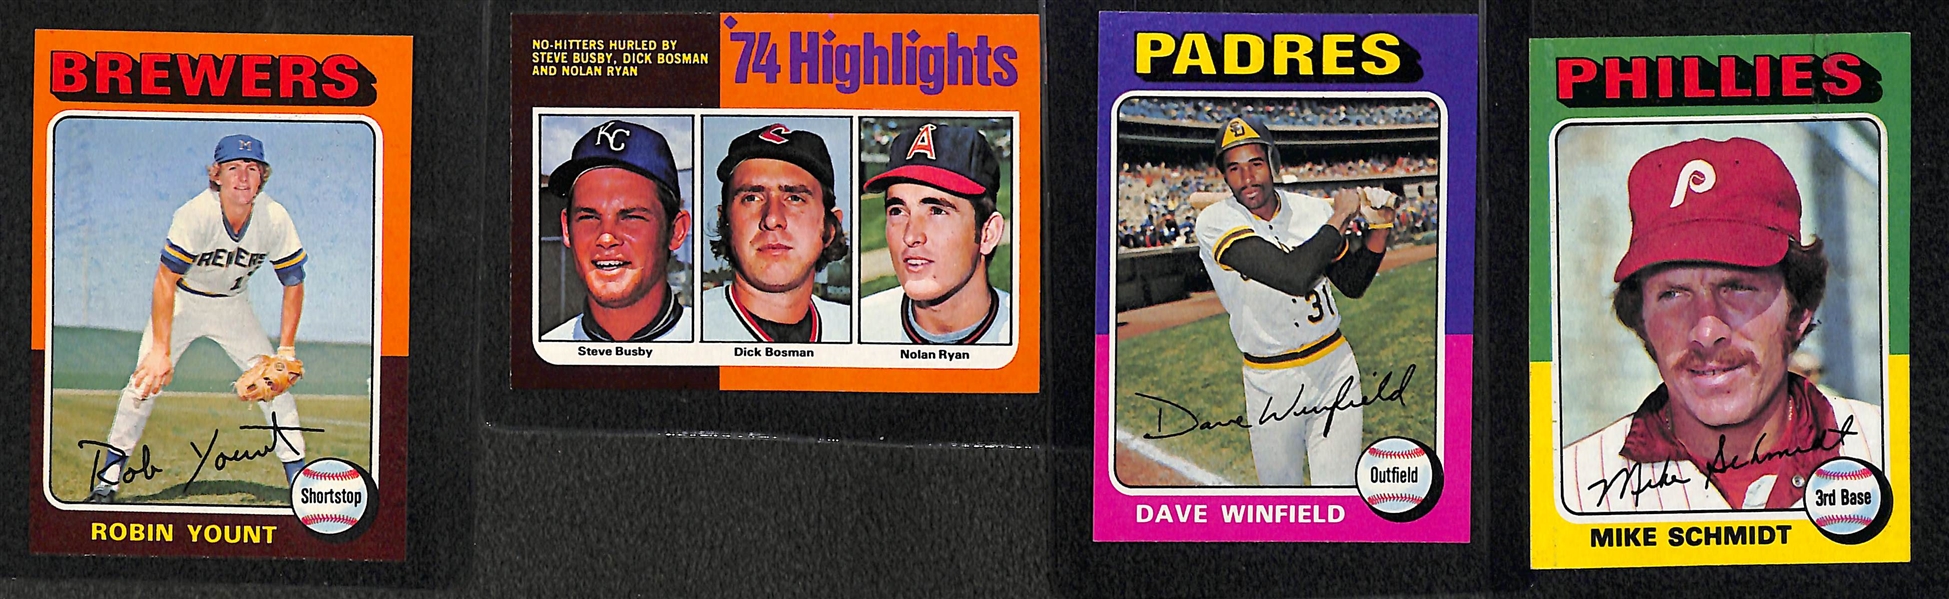 Lot Detail - 1975 Topps Baseball Card Set (Missing George Brett Rookie  offered in above lot) - Many Pack-Fresh Cards